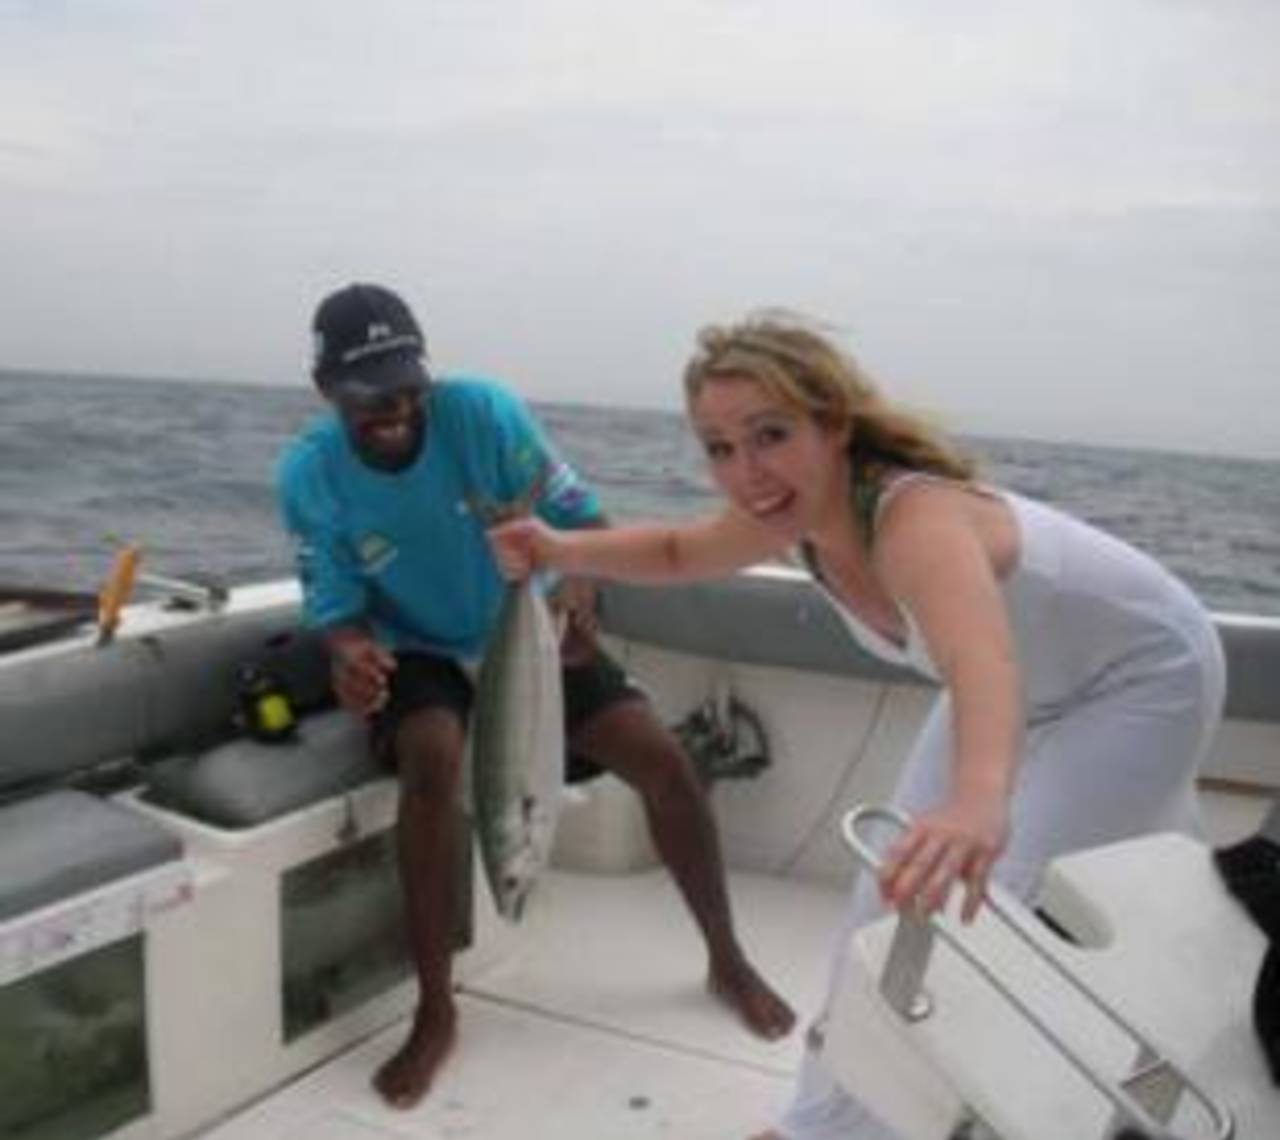 One of Bangalore Royal Challengers' Mischief Gals cheerleaders on a fishing trip in South Africa